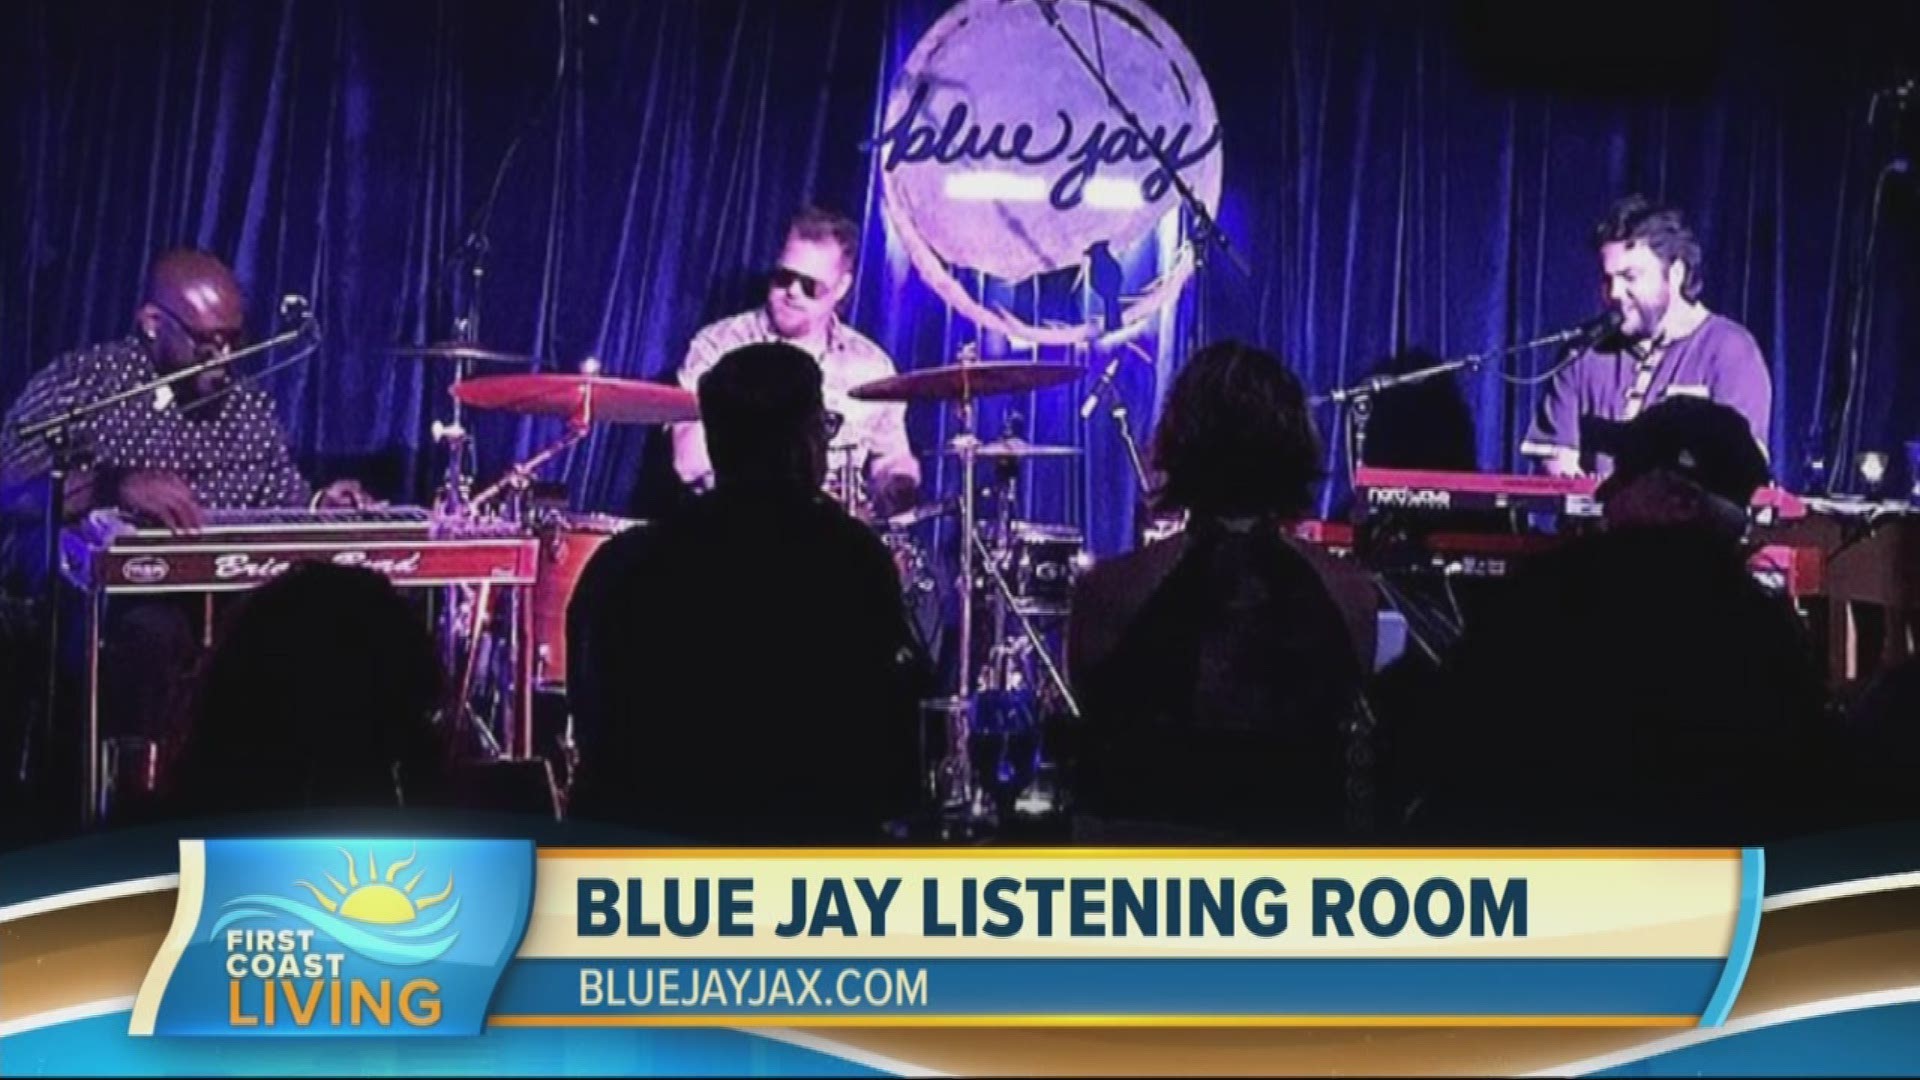 Check out the Blue Jay Listening Room!